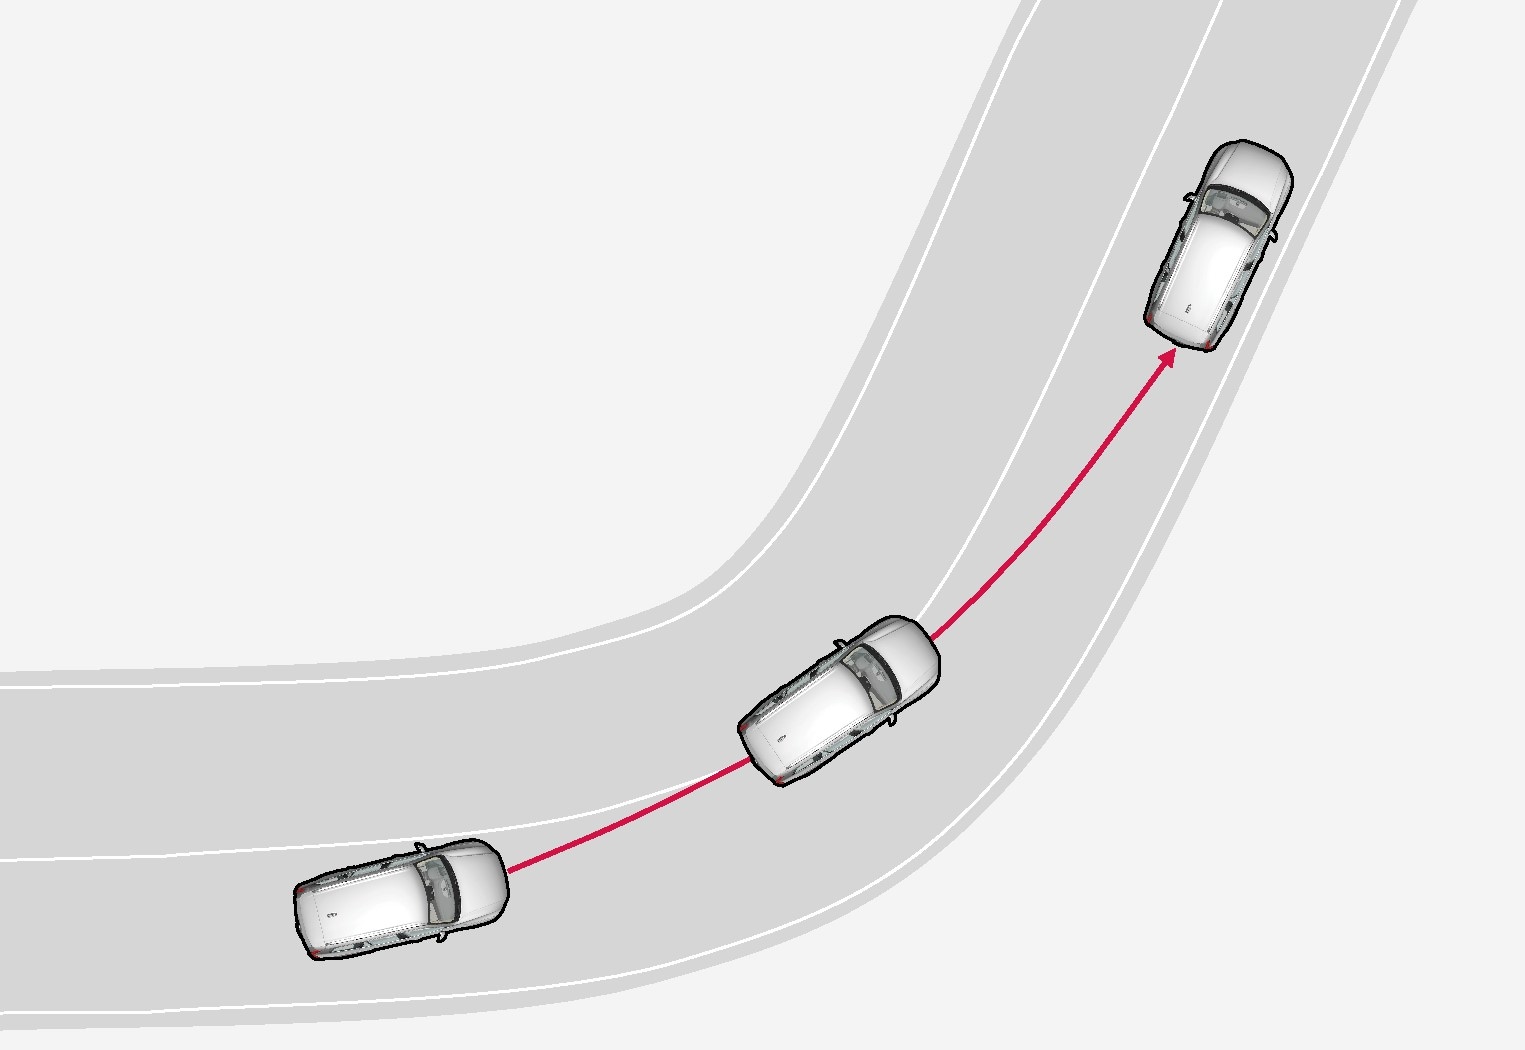 Lane assistance does not engage on sharp inside curves.